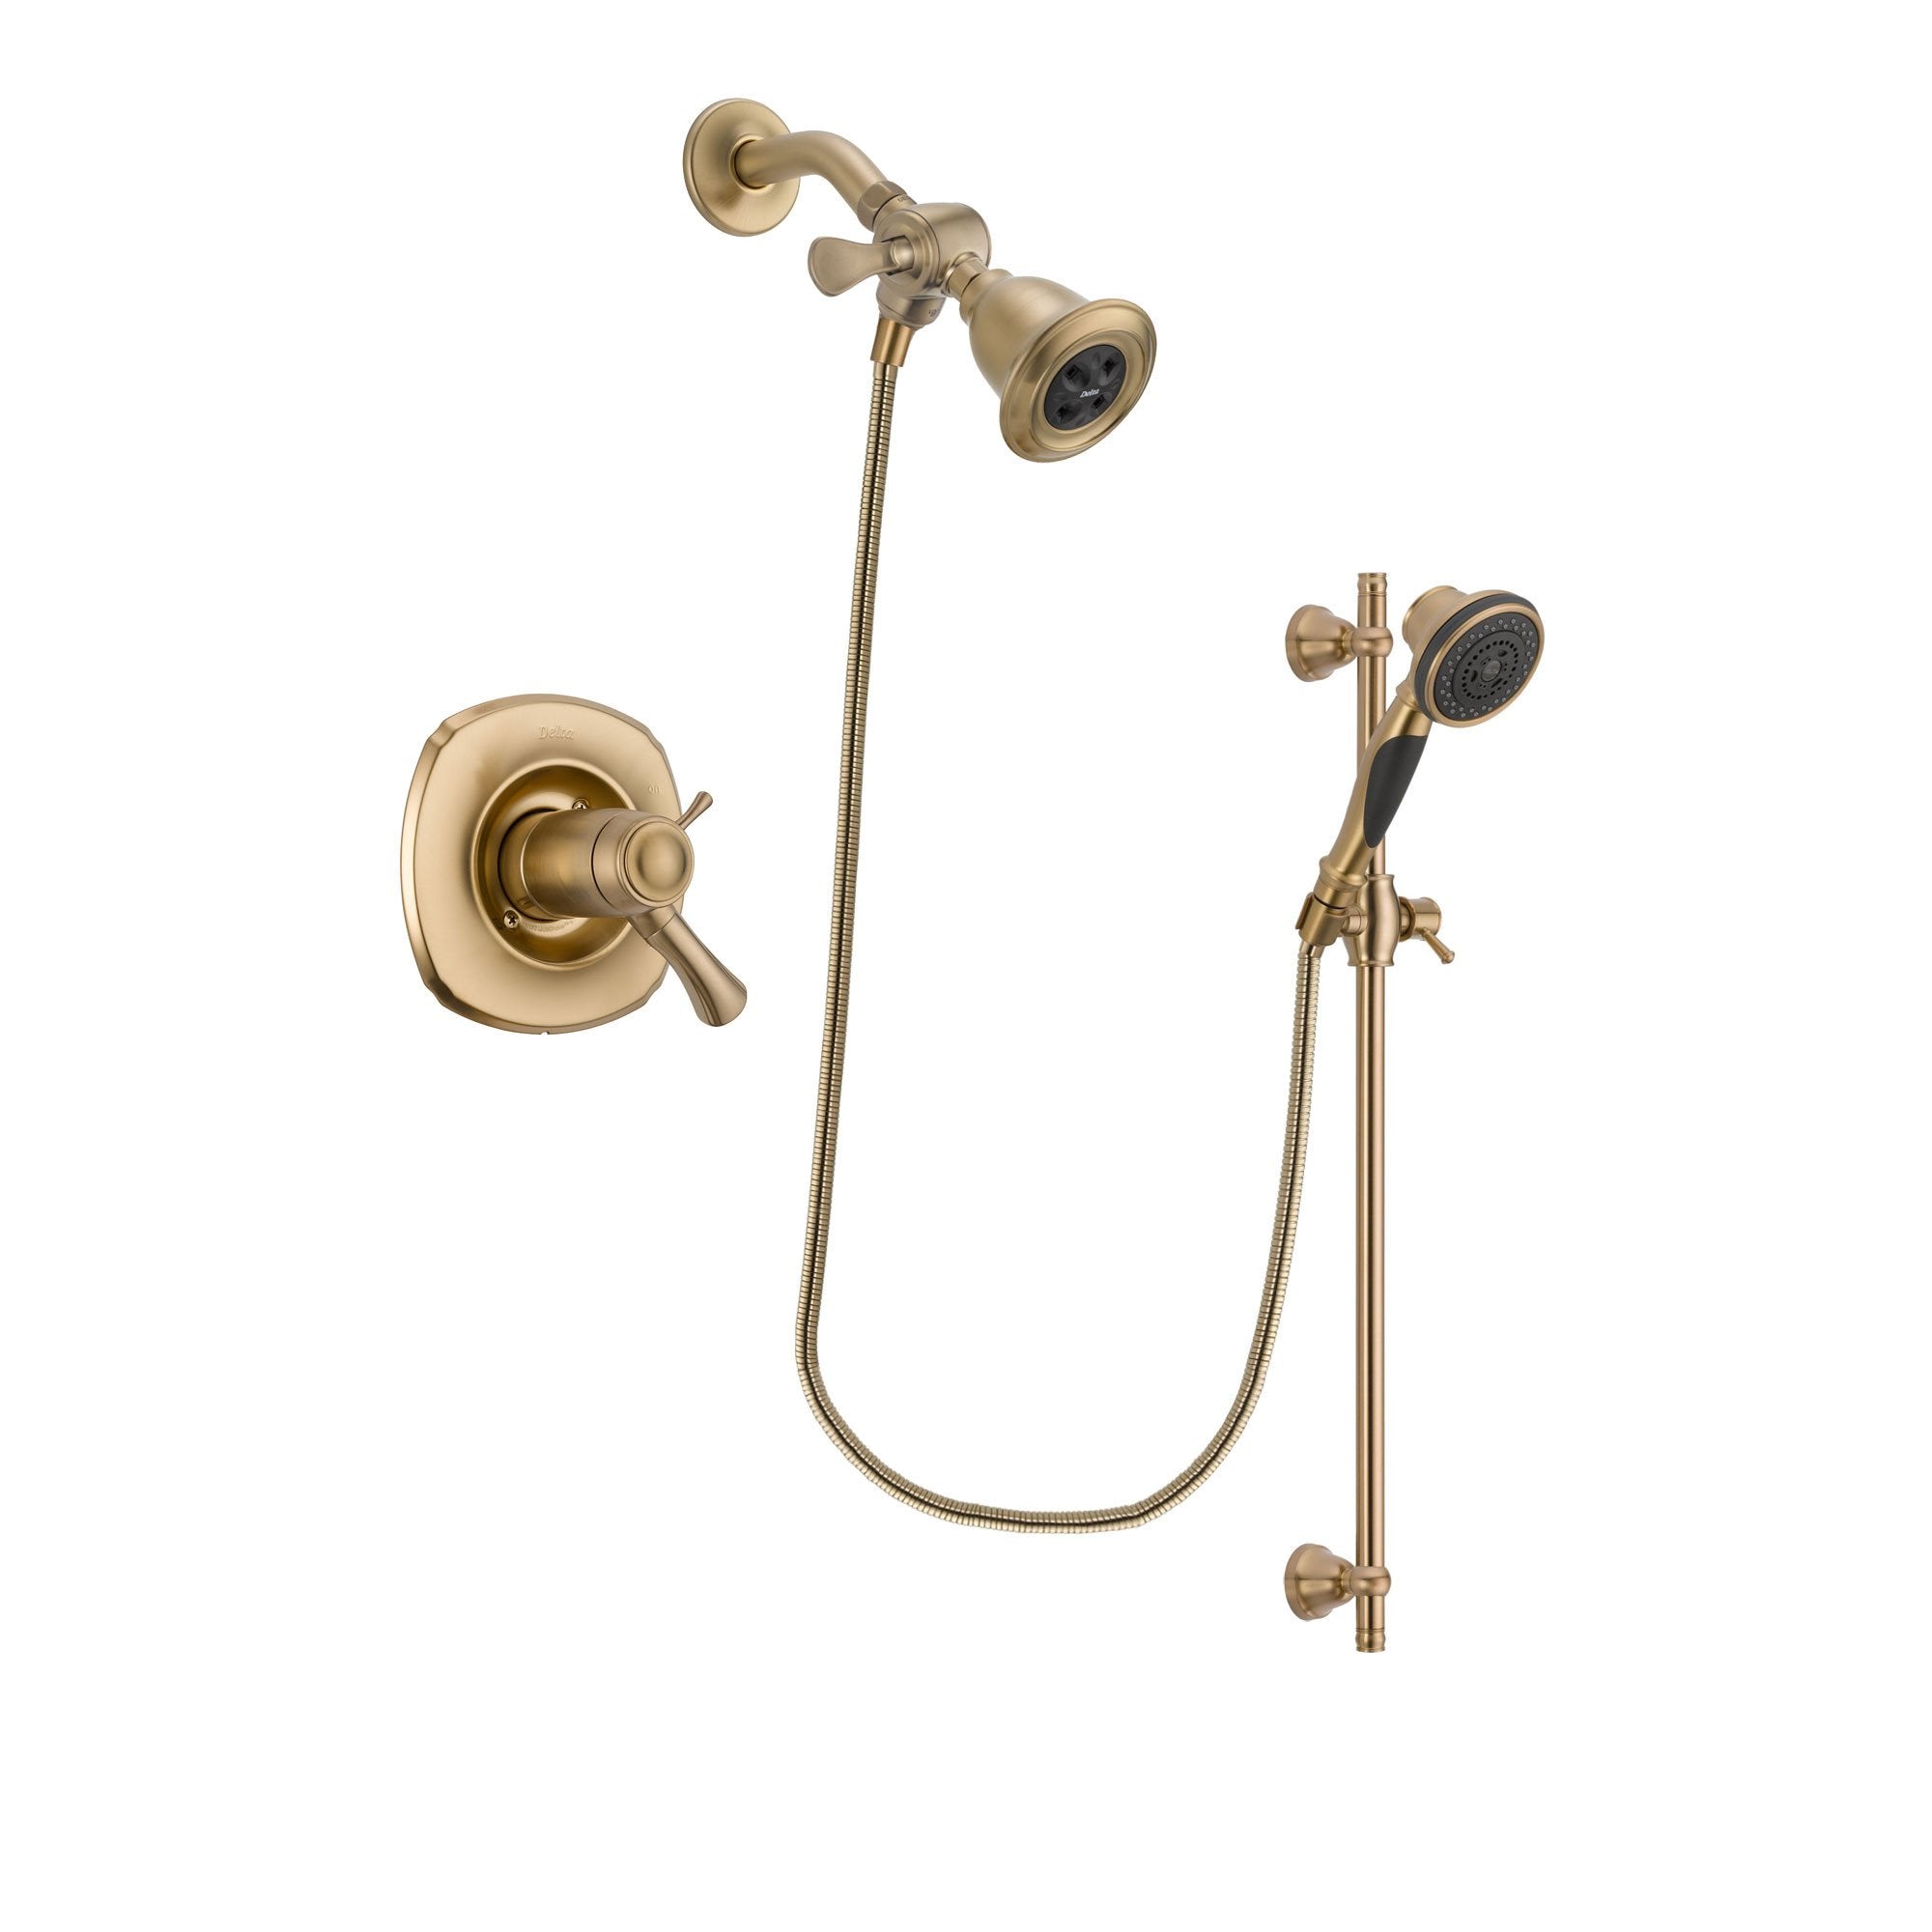 Delta Addison Champagne Bronze Finish Thermostatic Shower Faucet System Package with Water Efficient Showerhead and Personal Handheld Shower Spray with Slide Bar Includes Rough-in Valve DSP3556V